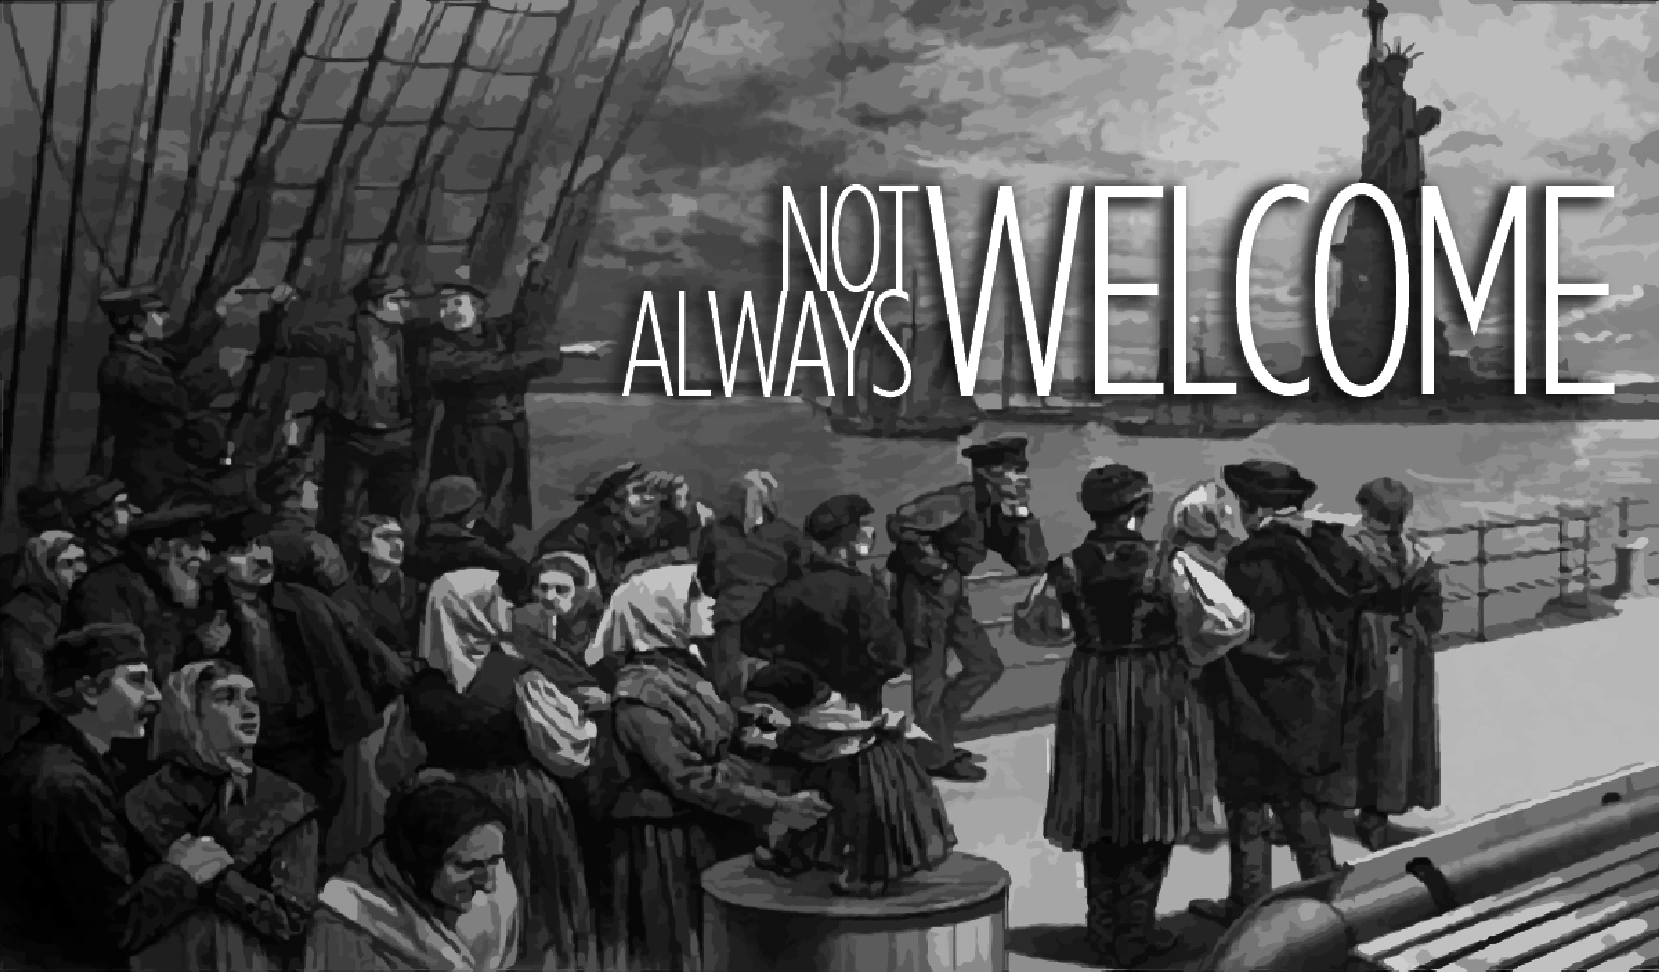 Illustration from National Park Service of immigrants heading to Statue of Liberty.